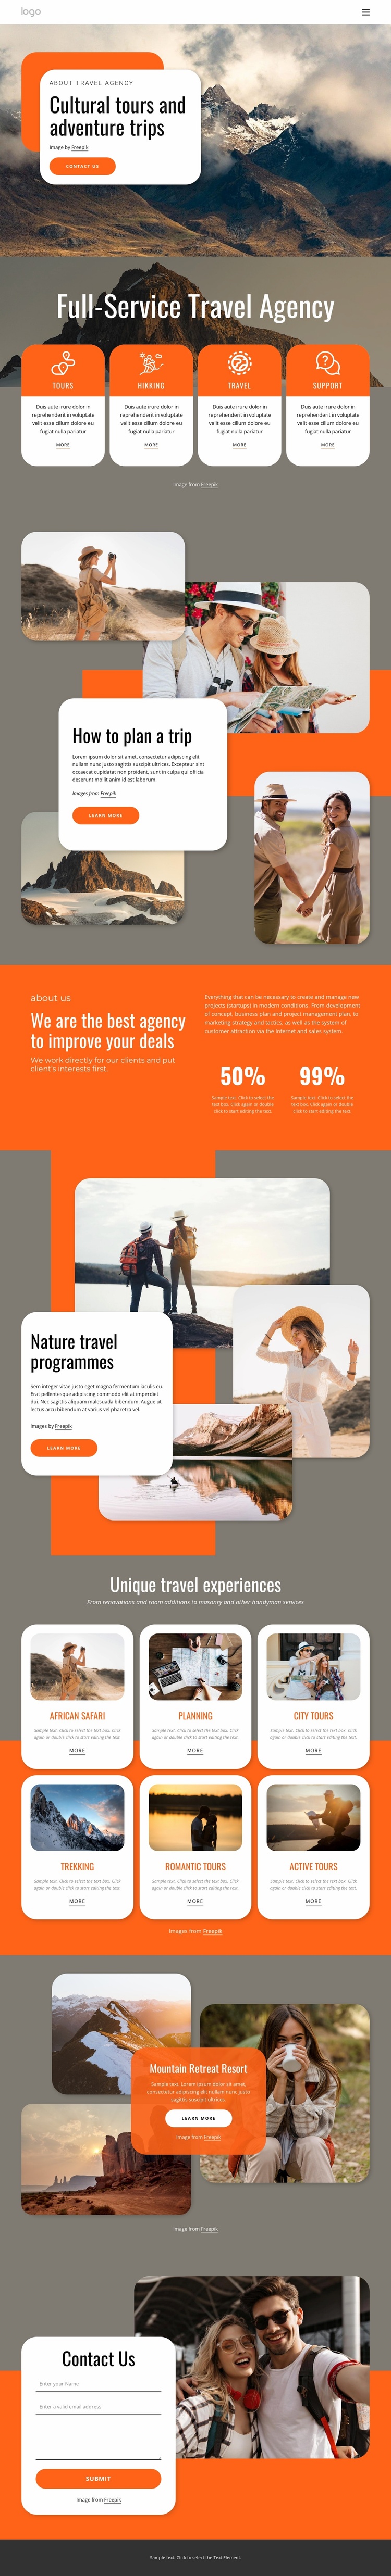 Group travel for all ages Ecommerce Website Design